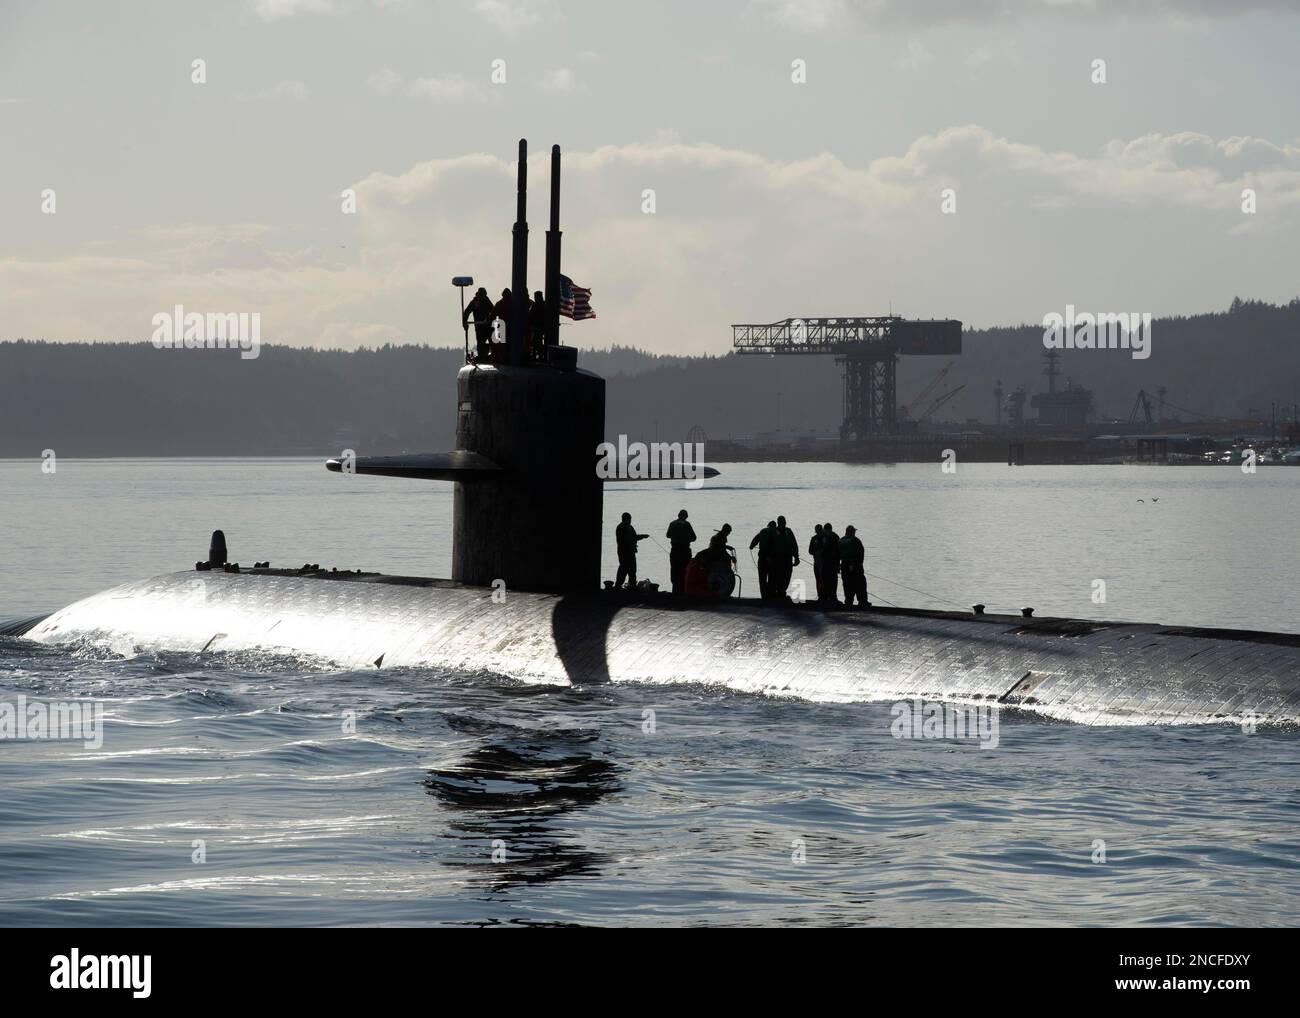 230210-N-ED185-1263  PUGET SOUND, Wash. (Feb. 10, 2023) The Los Angeles-class fast-attack submarine USS Key West (SSN 722) transits the Puget Sound before mooring at Naval Base Kitsap – Bremerton, Washington, February 10, 2023. Measuring more than 360 feet long and weighing more than 6,900 tons when submerged, Key West supports a multitude of missions to include anti-submarine warfare, anti-surface ship warfare, surveillance and reconnaissance, and strike warfare. (U.S. Navy Photo by Mass Communication Specialist 1st Class Brian. G. Reynolds) Stock Photo